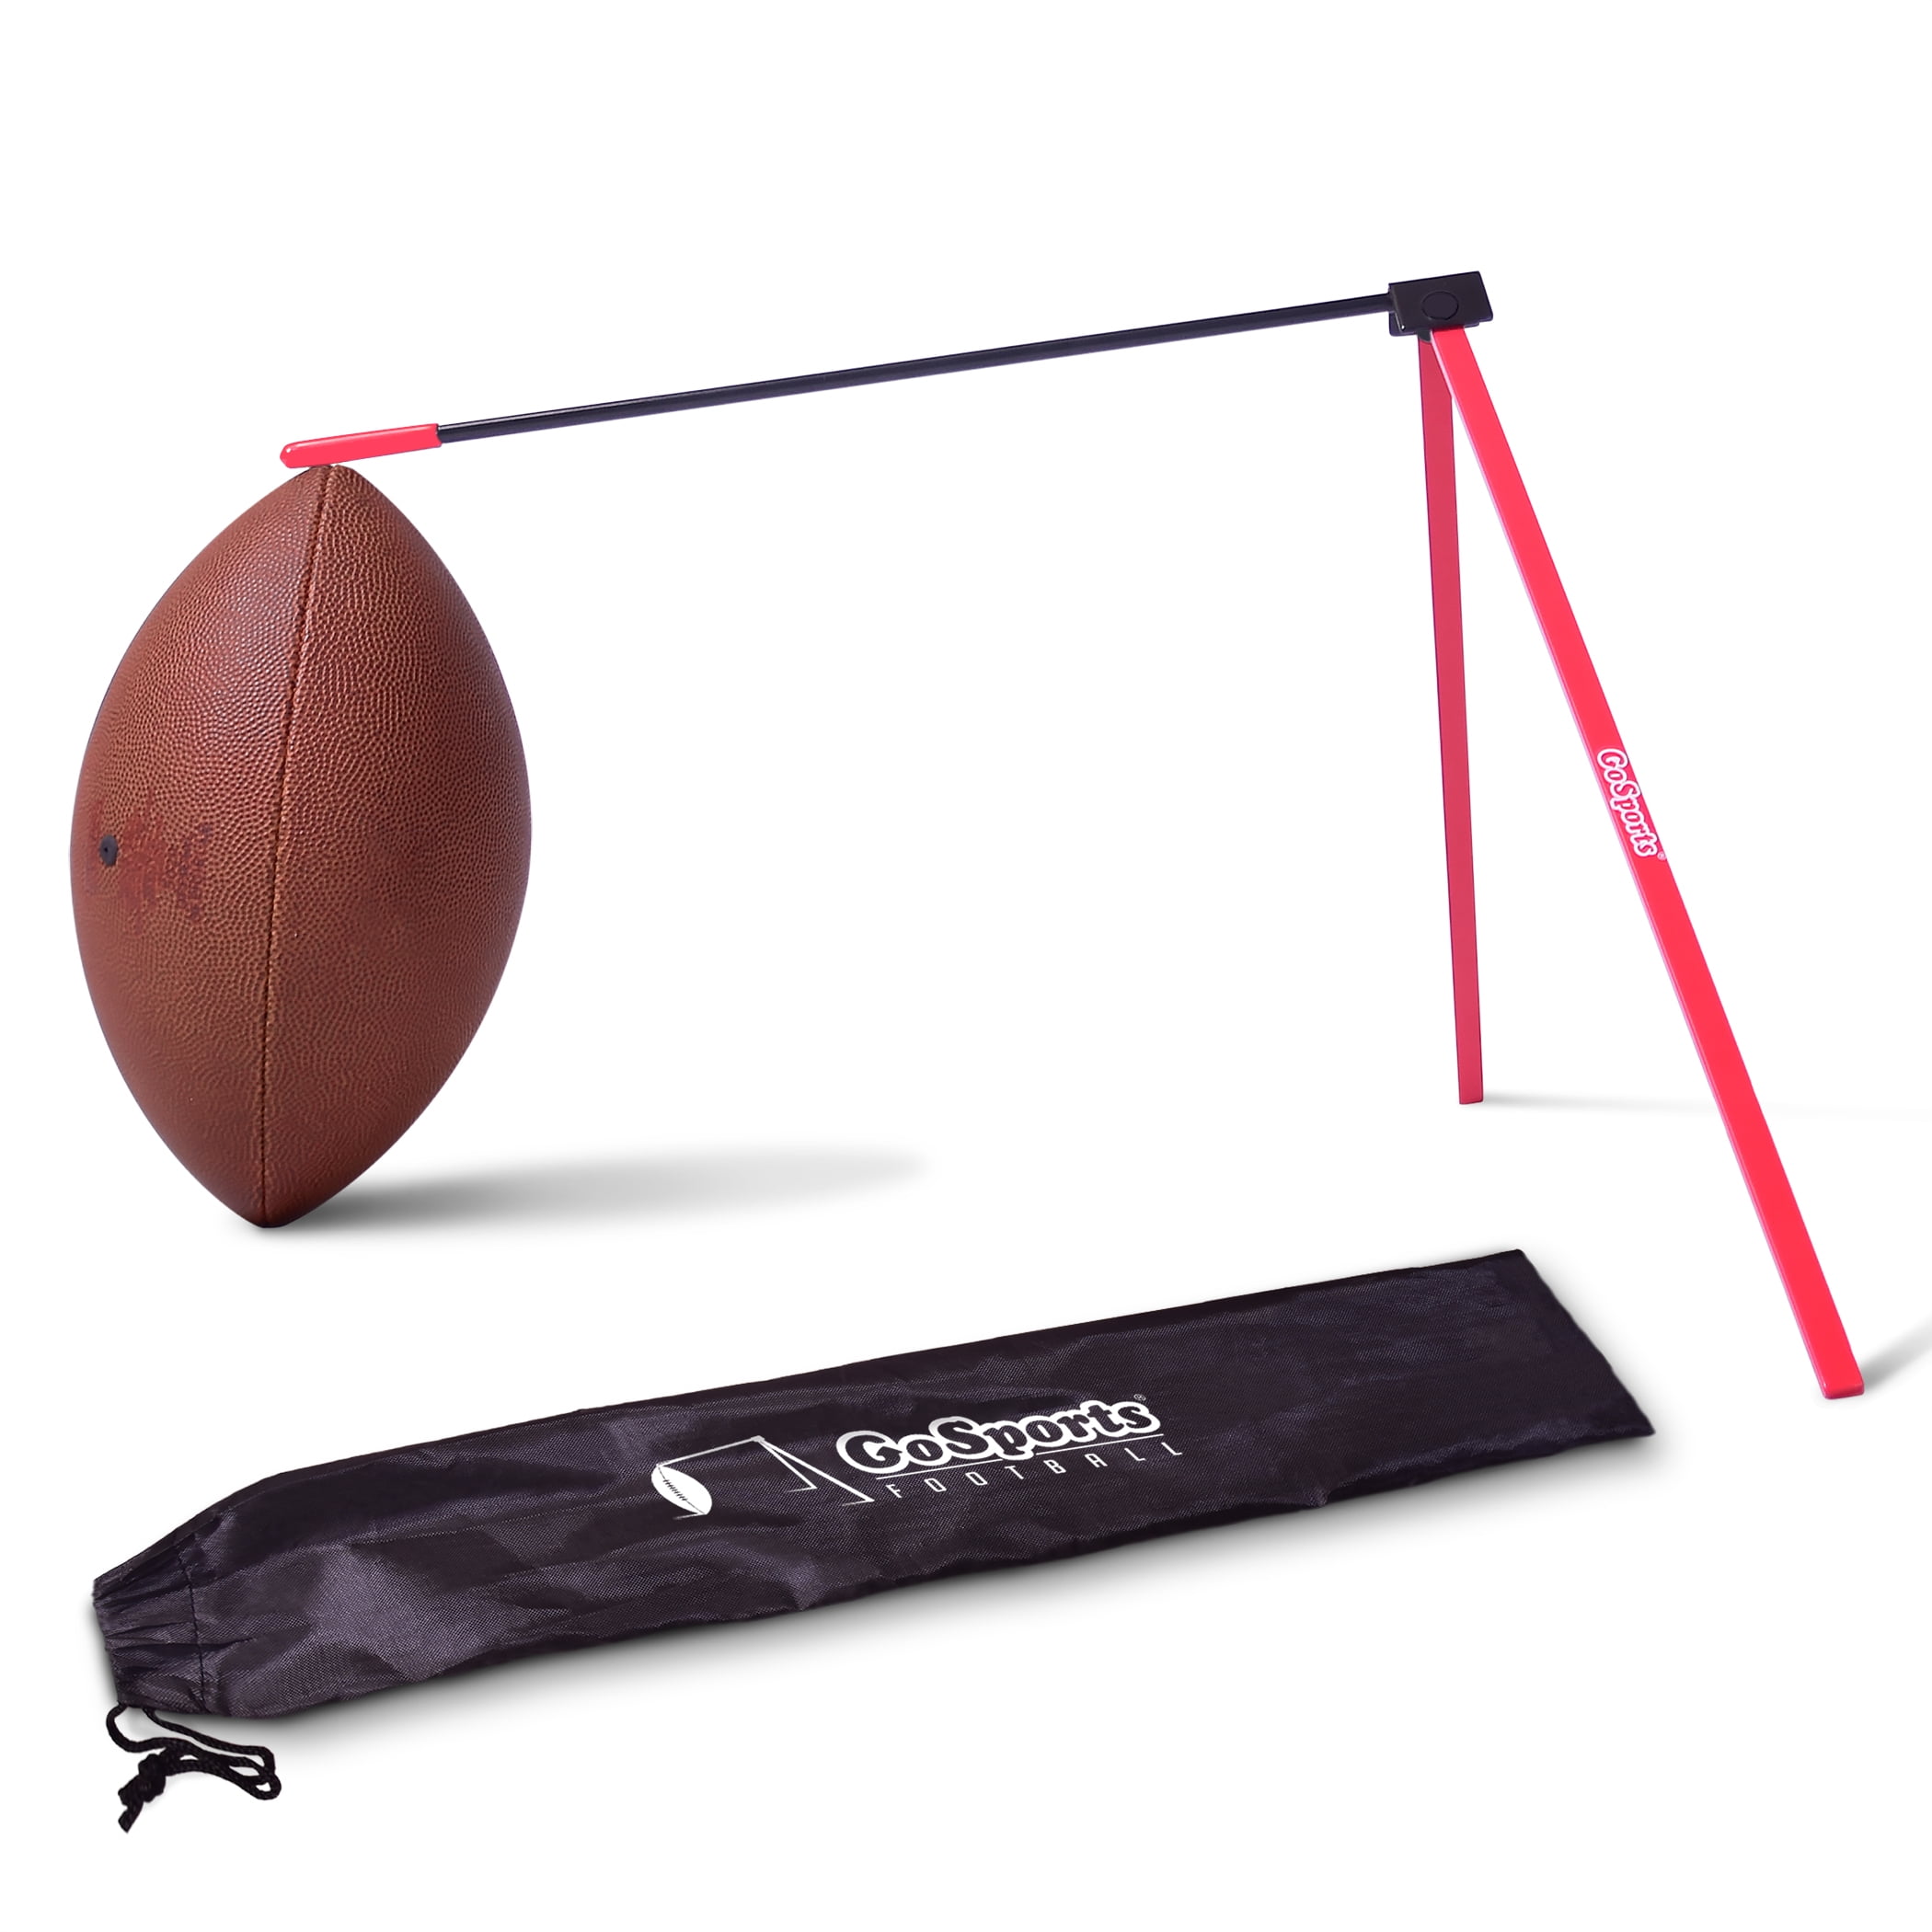 Easy Transportation with Carrying Bag Consist of Fiberglass Arm and Metal Base for Football Kick Training PodiuMax Football Place Holder Kicking Tee Foldable